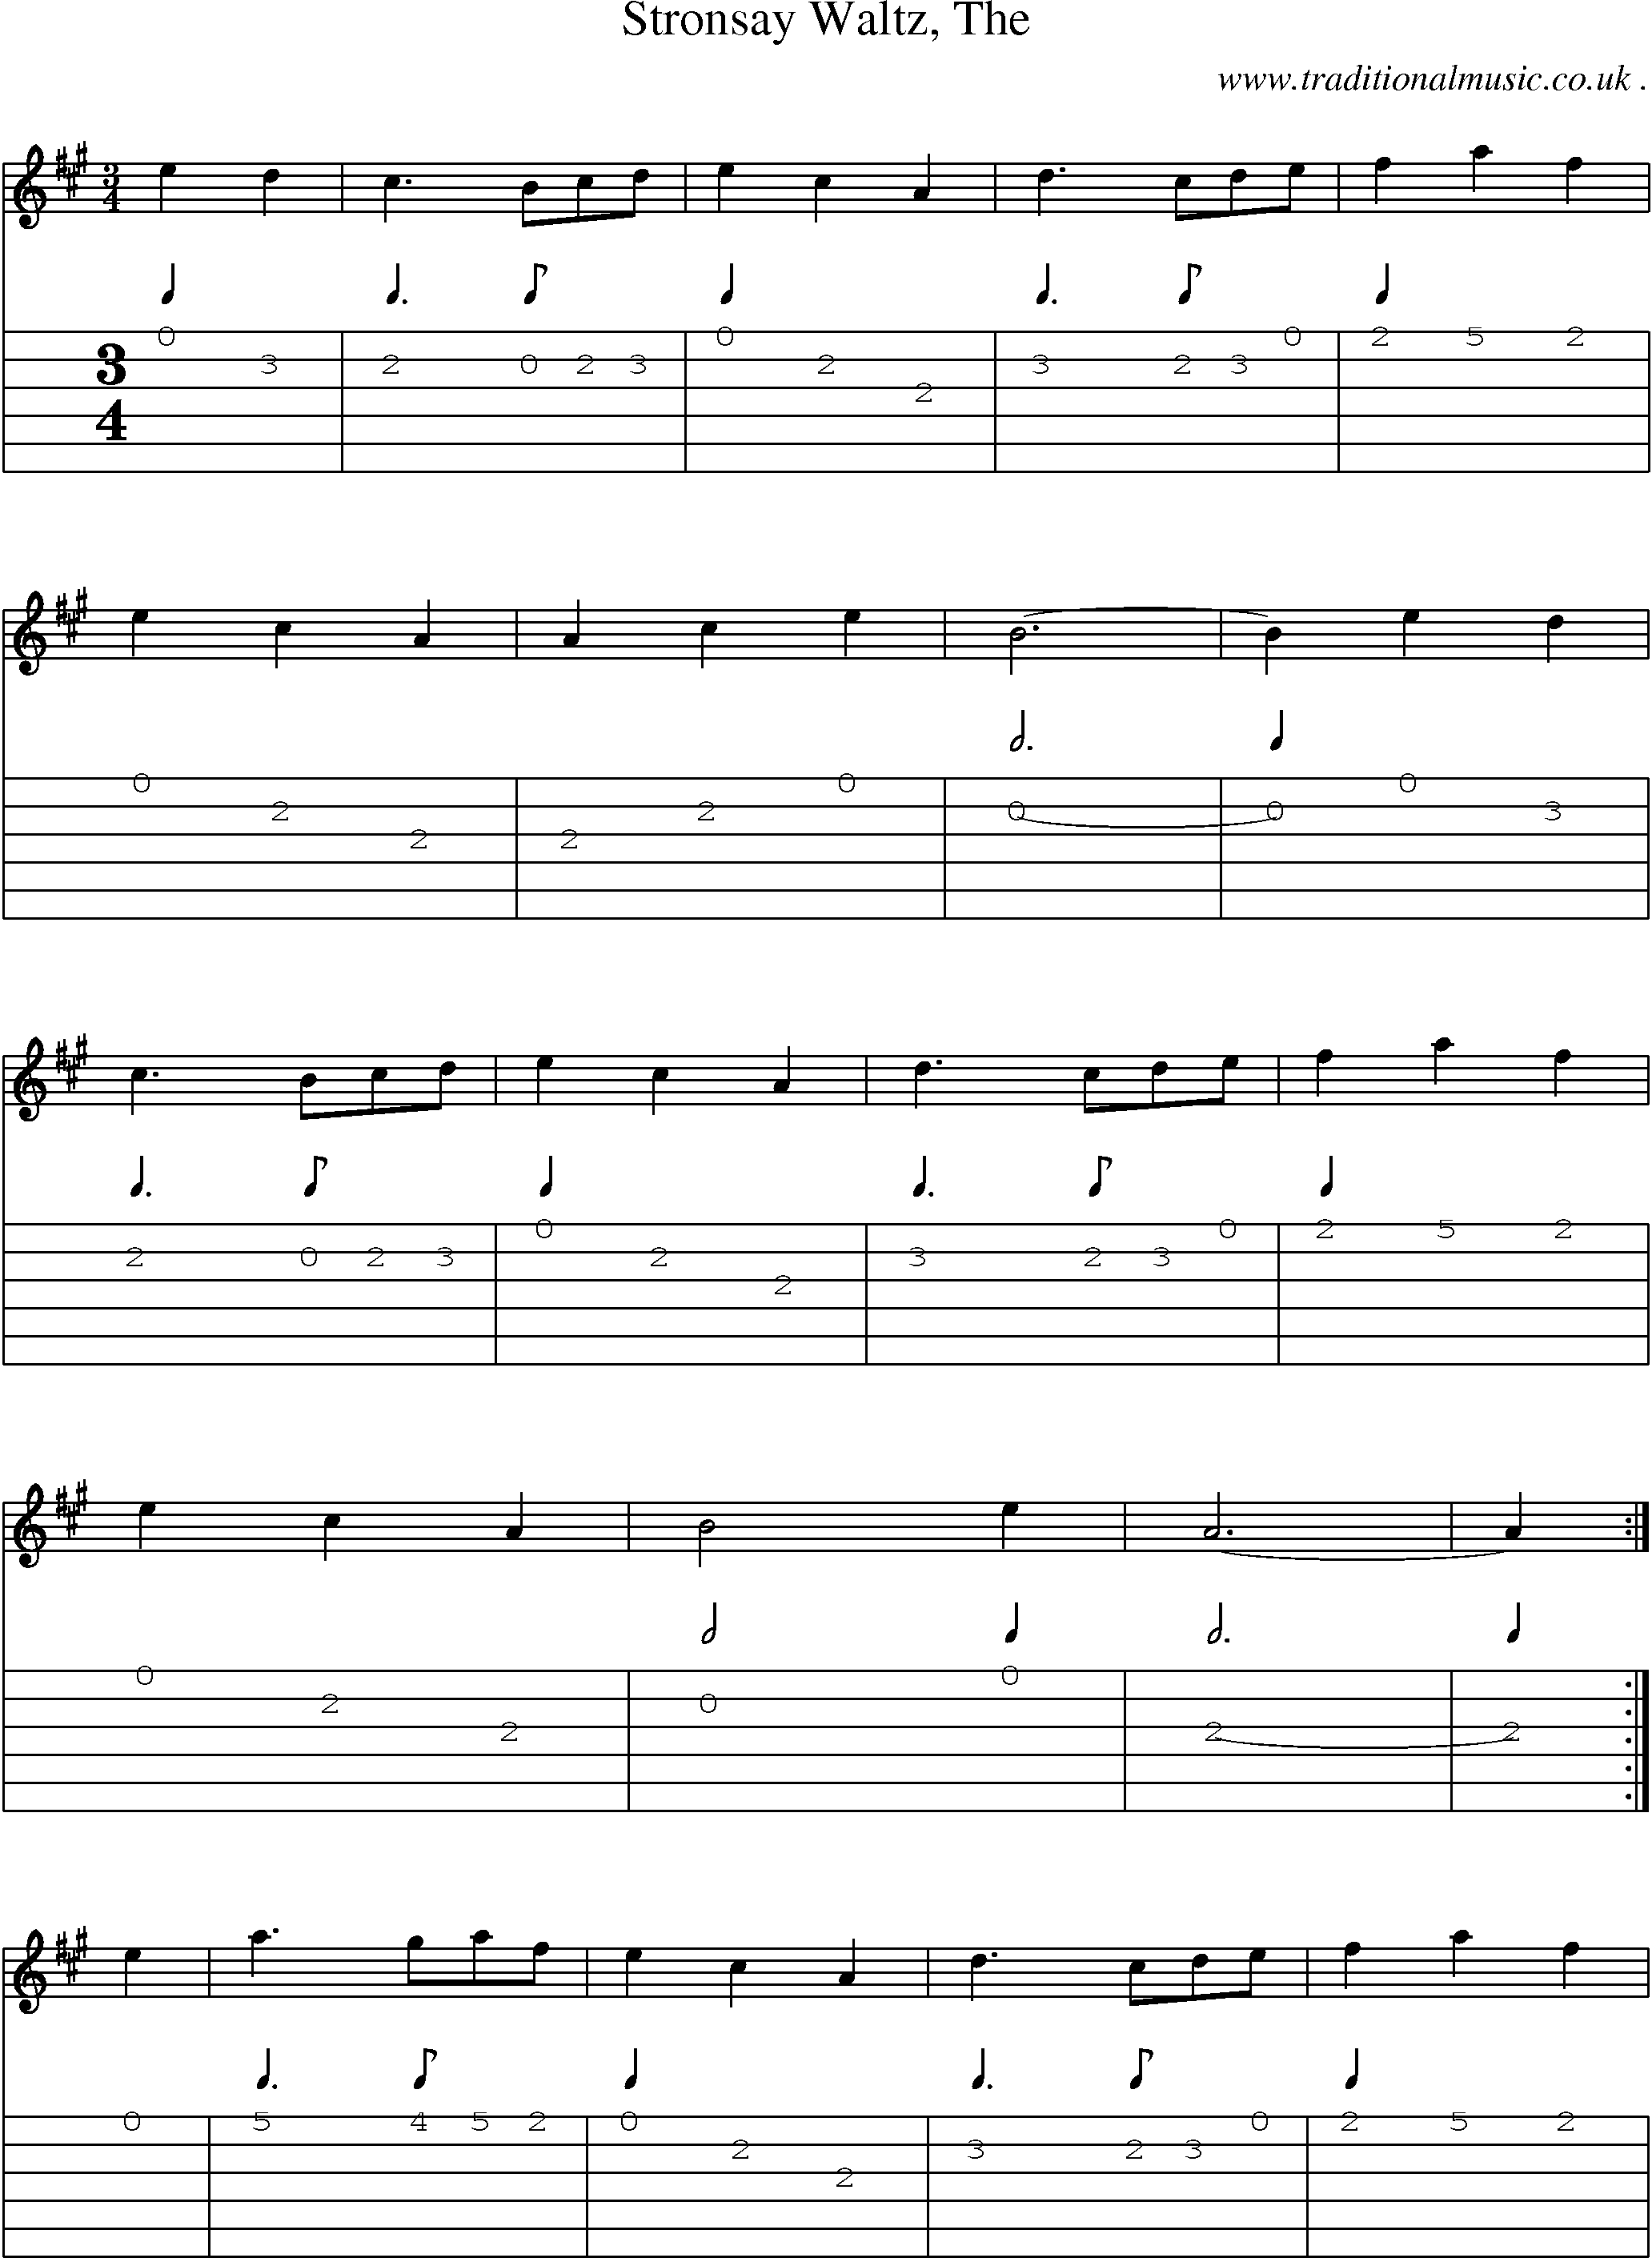 Sheet-music  score, Chords and Guitar Tabs for Stronsay Waltz The